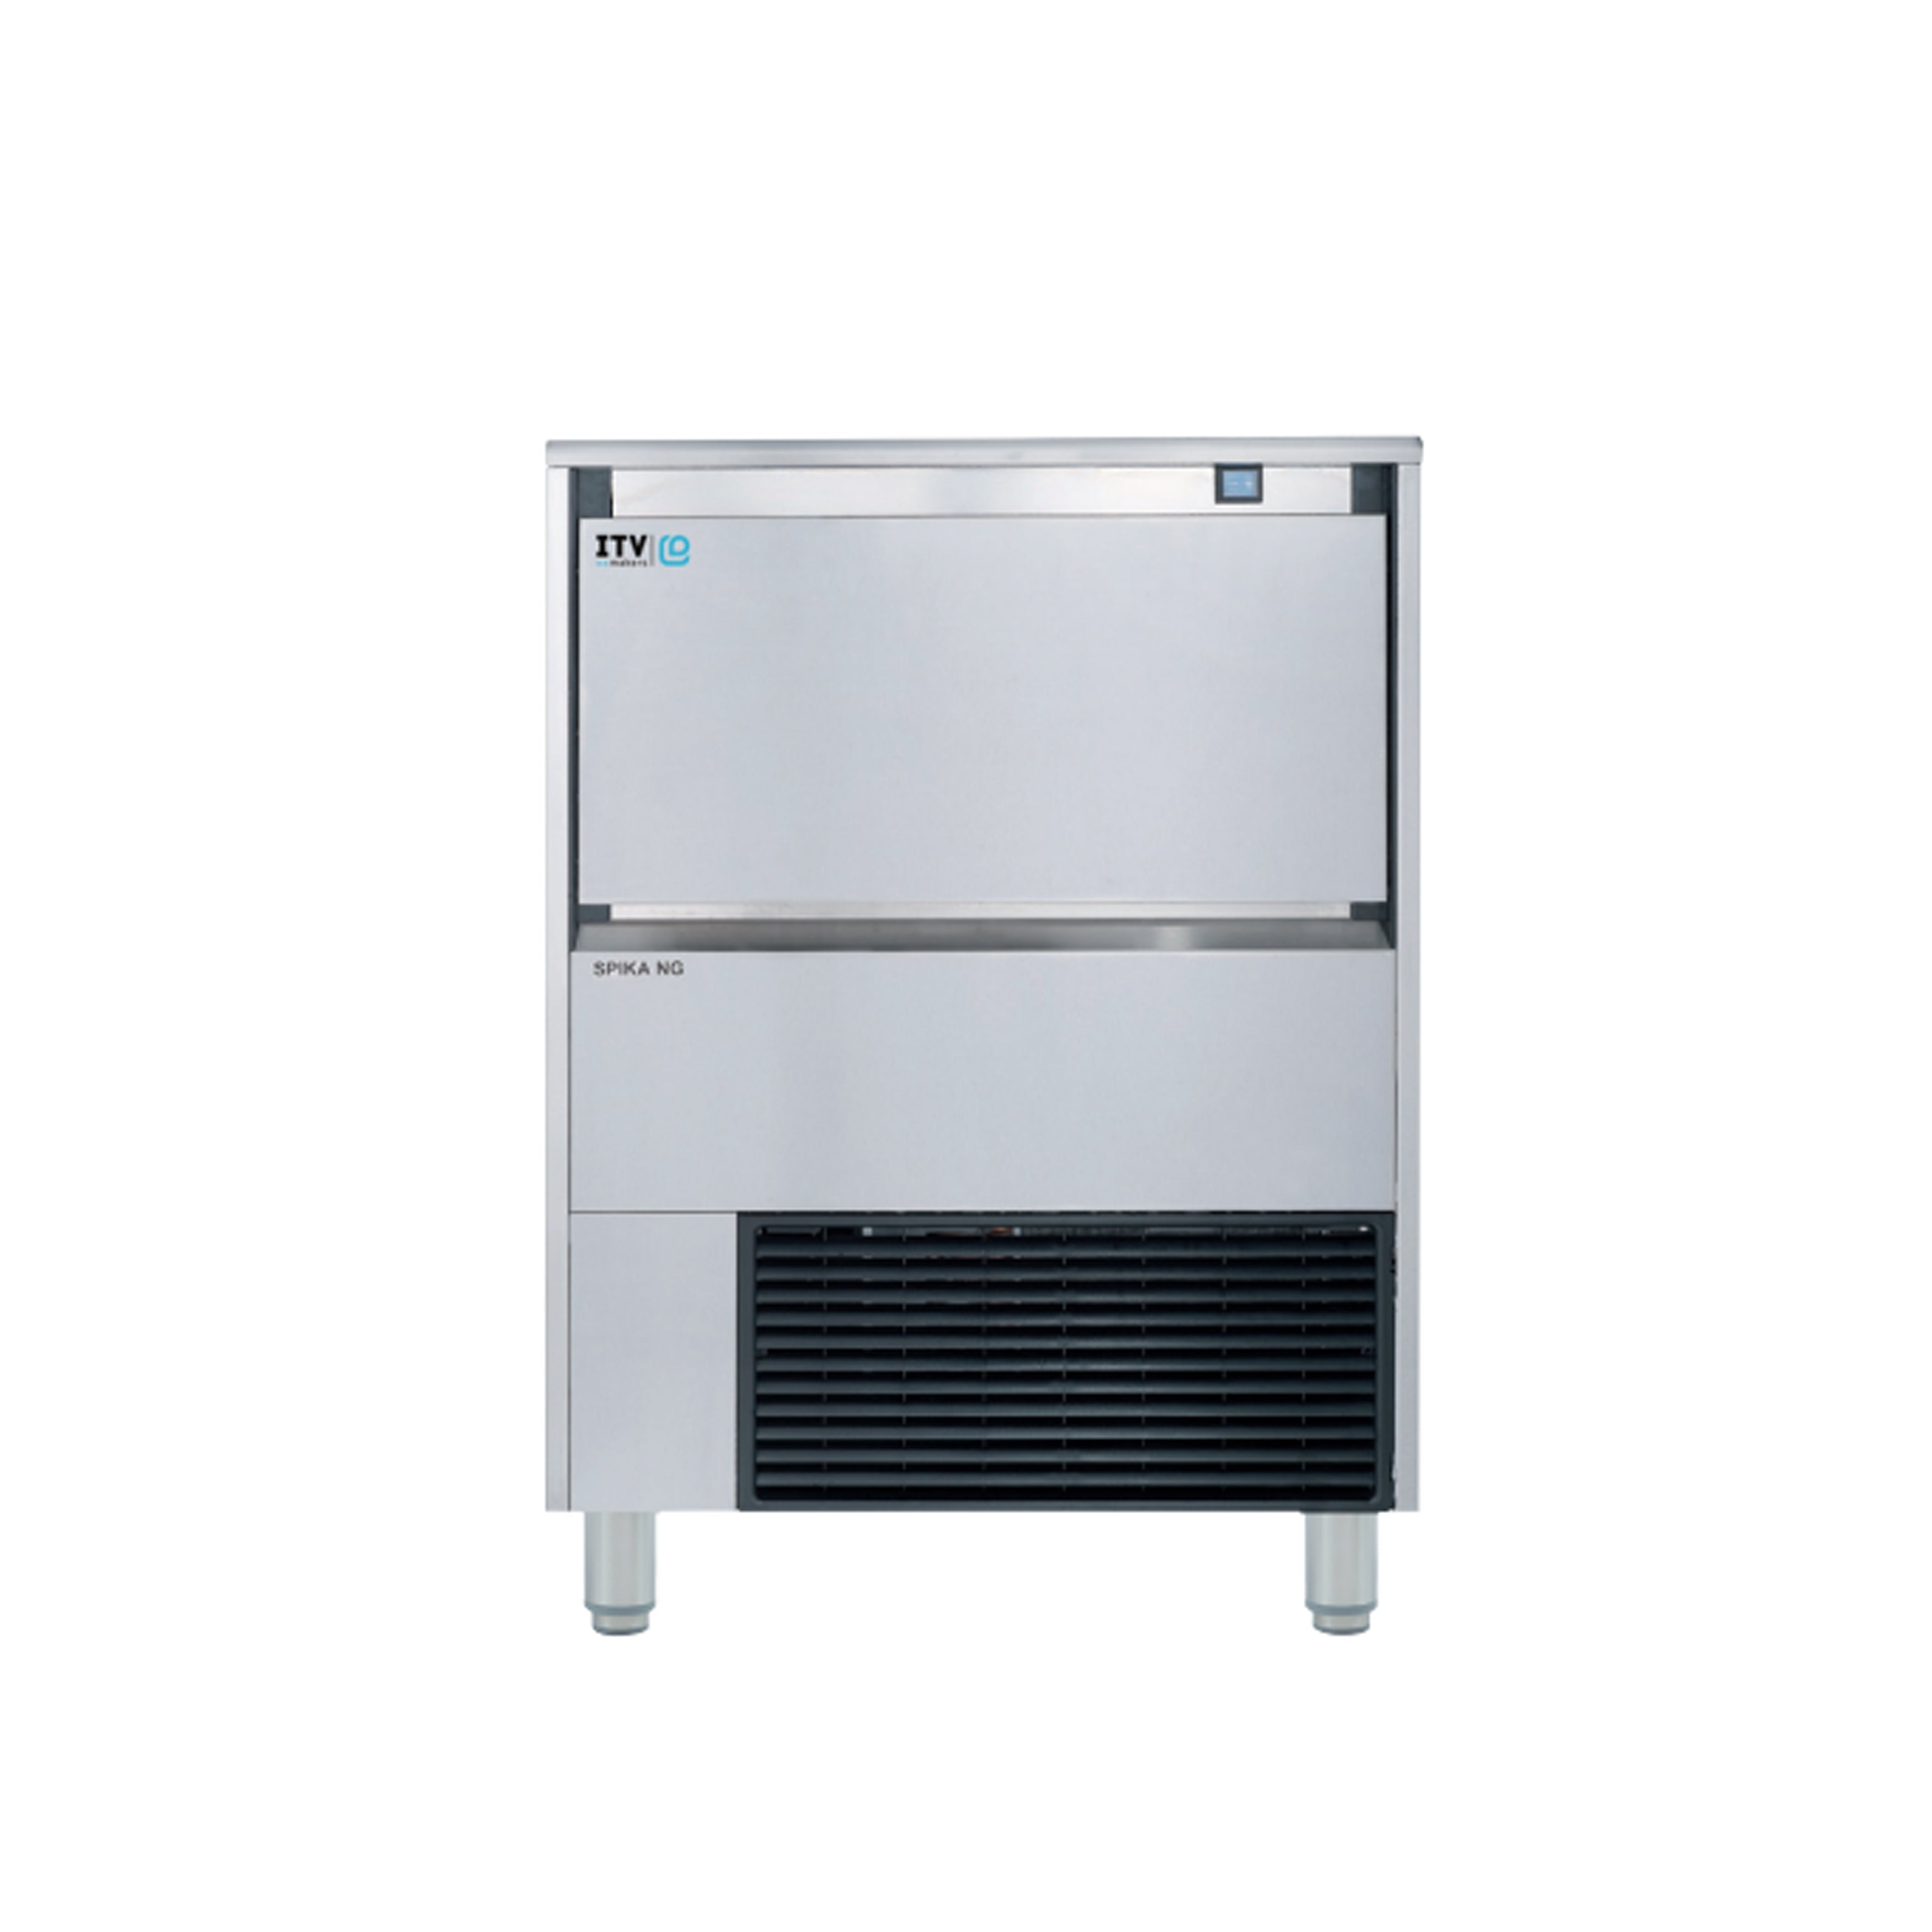 ITV - SPIKA NG 360W, Commercial Spika Cubers under-counter Ice Maker Self-Contained Ice Cube Machine 342lbs